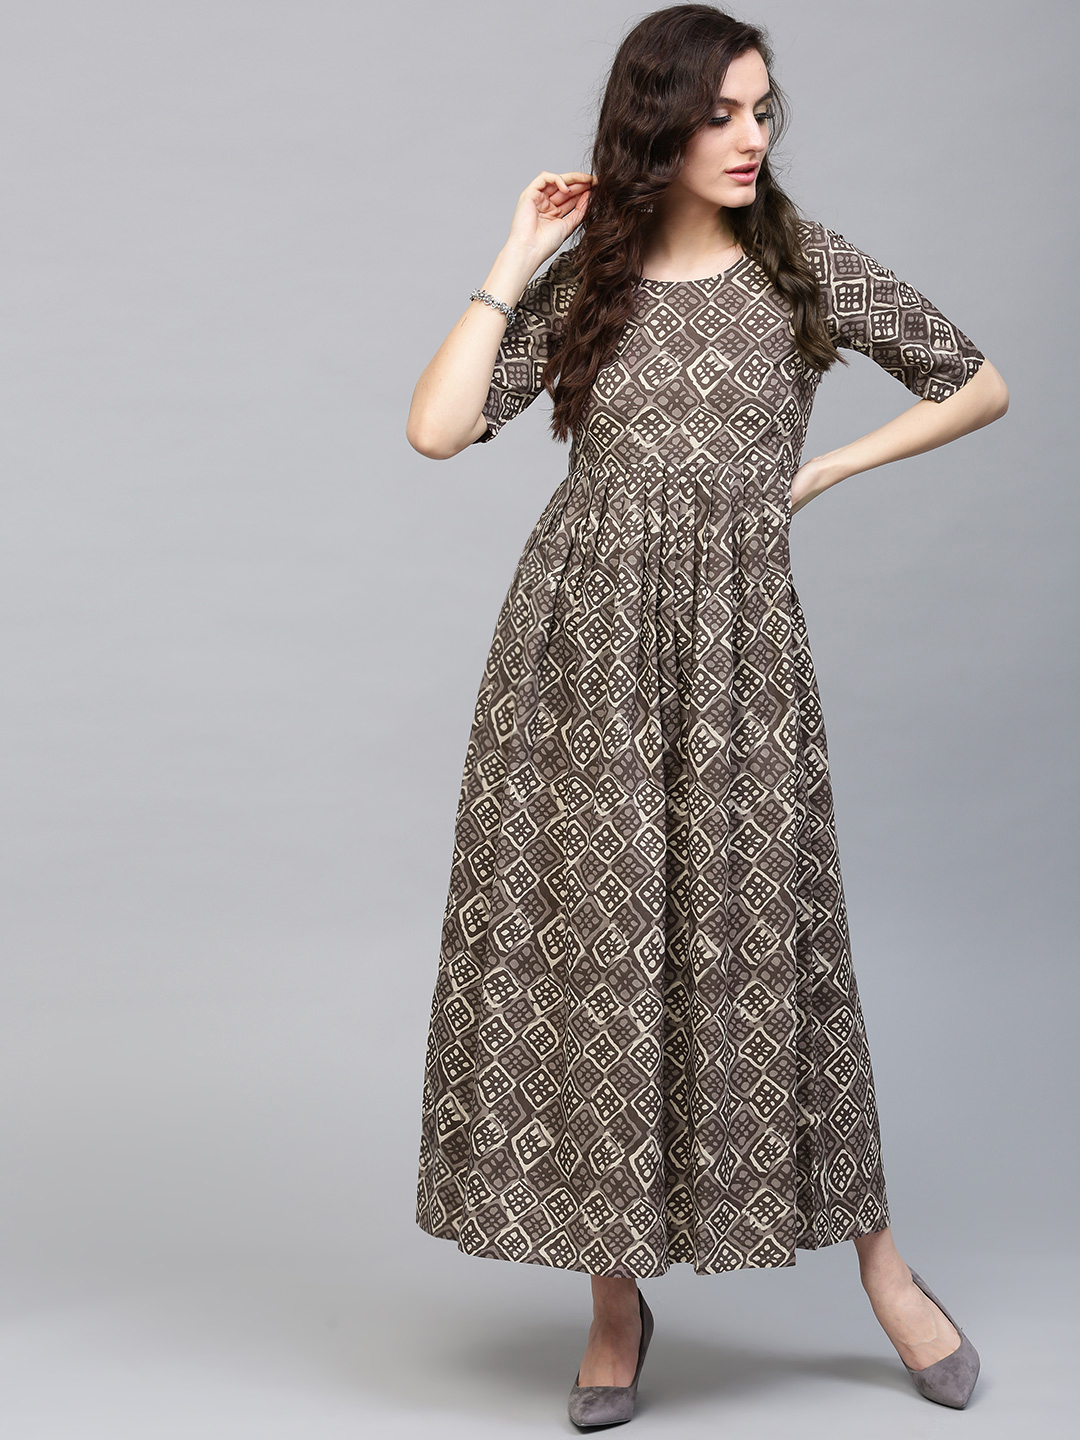 AKS Women Grey Printed Maxi Dress with Gathers Price in India